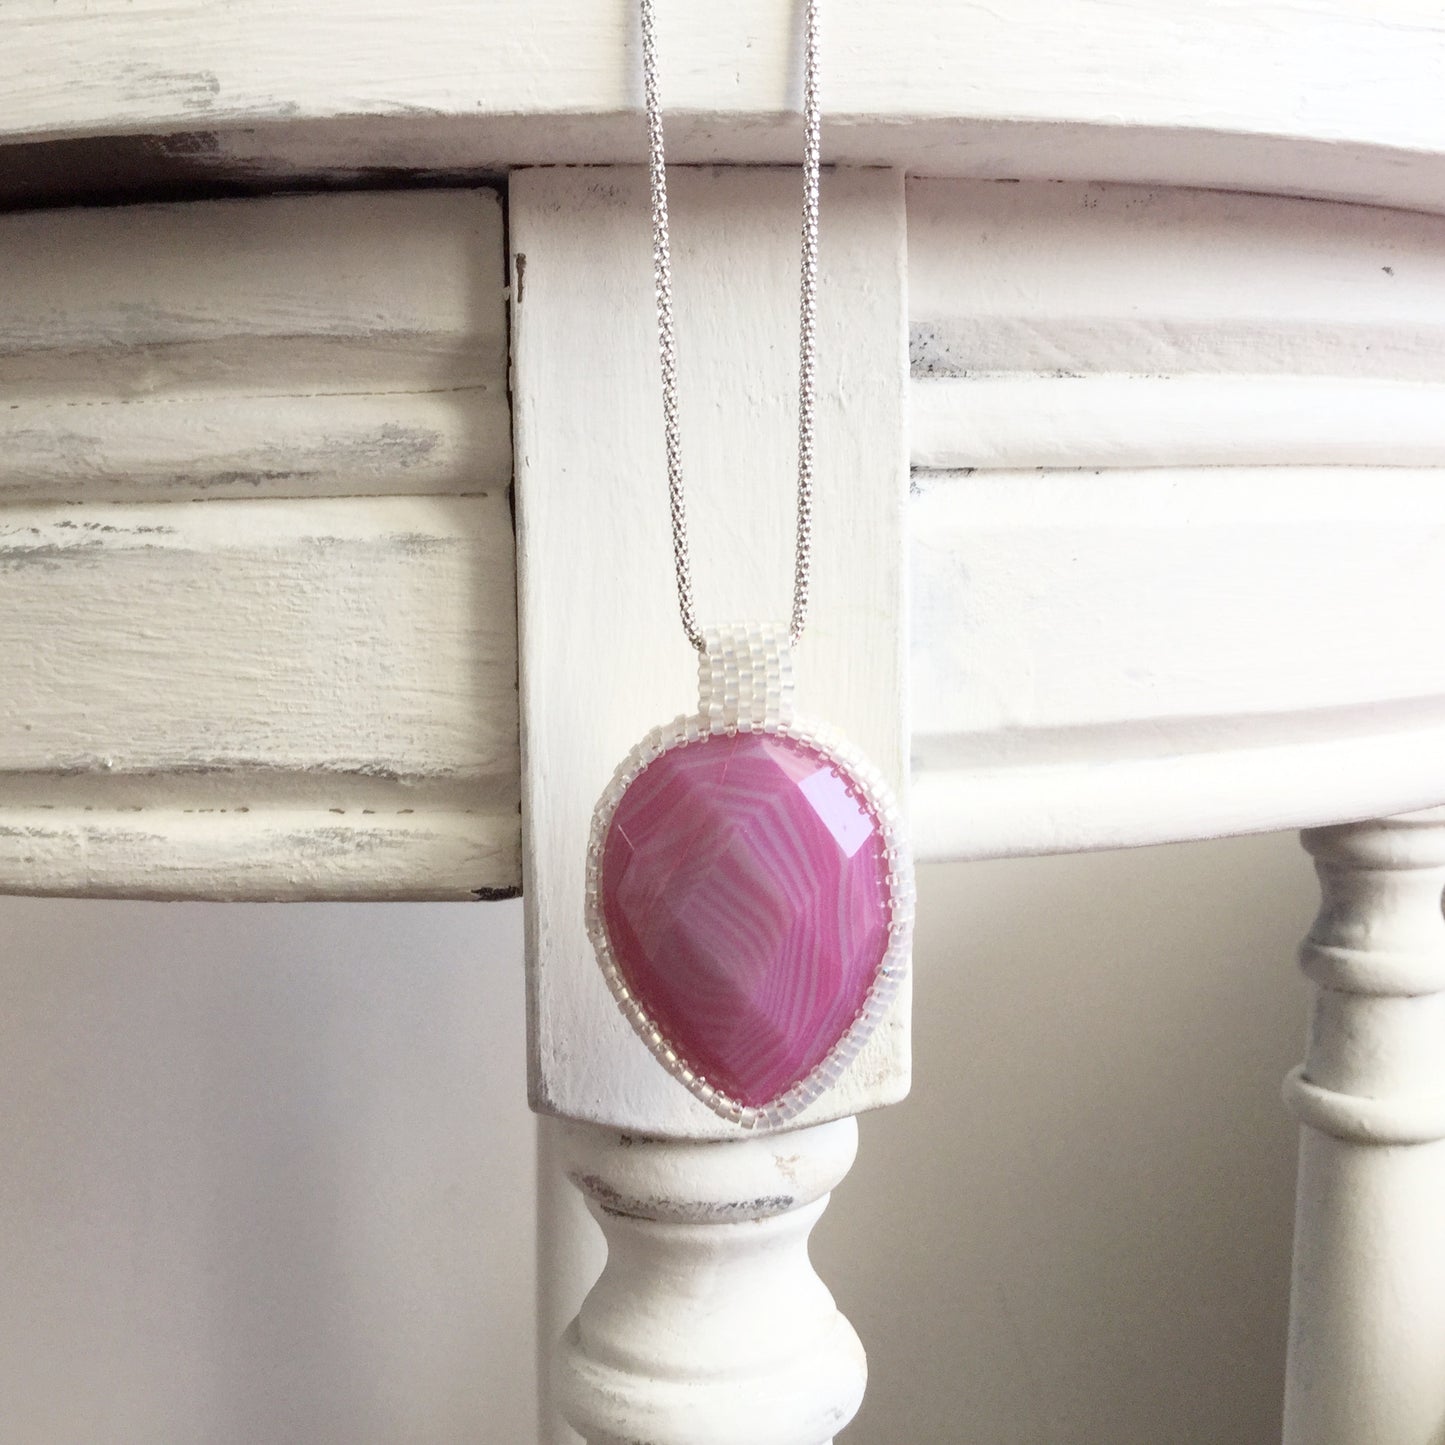 Gemstone pendants - click to view collection